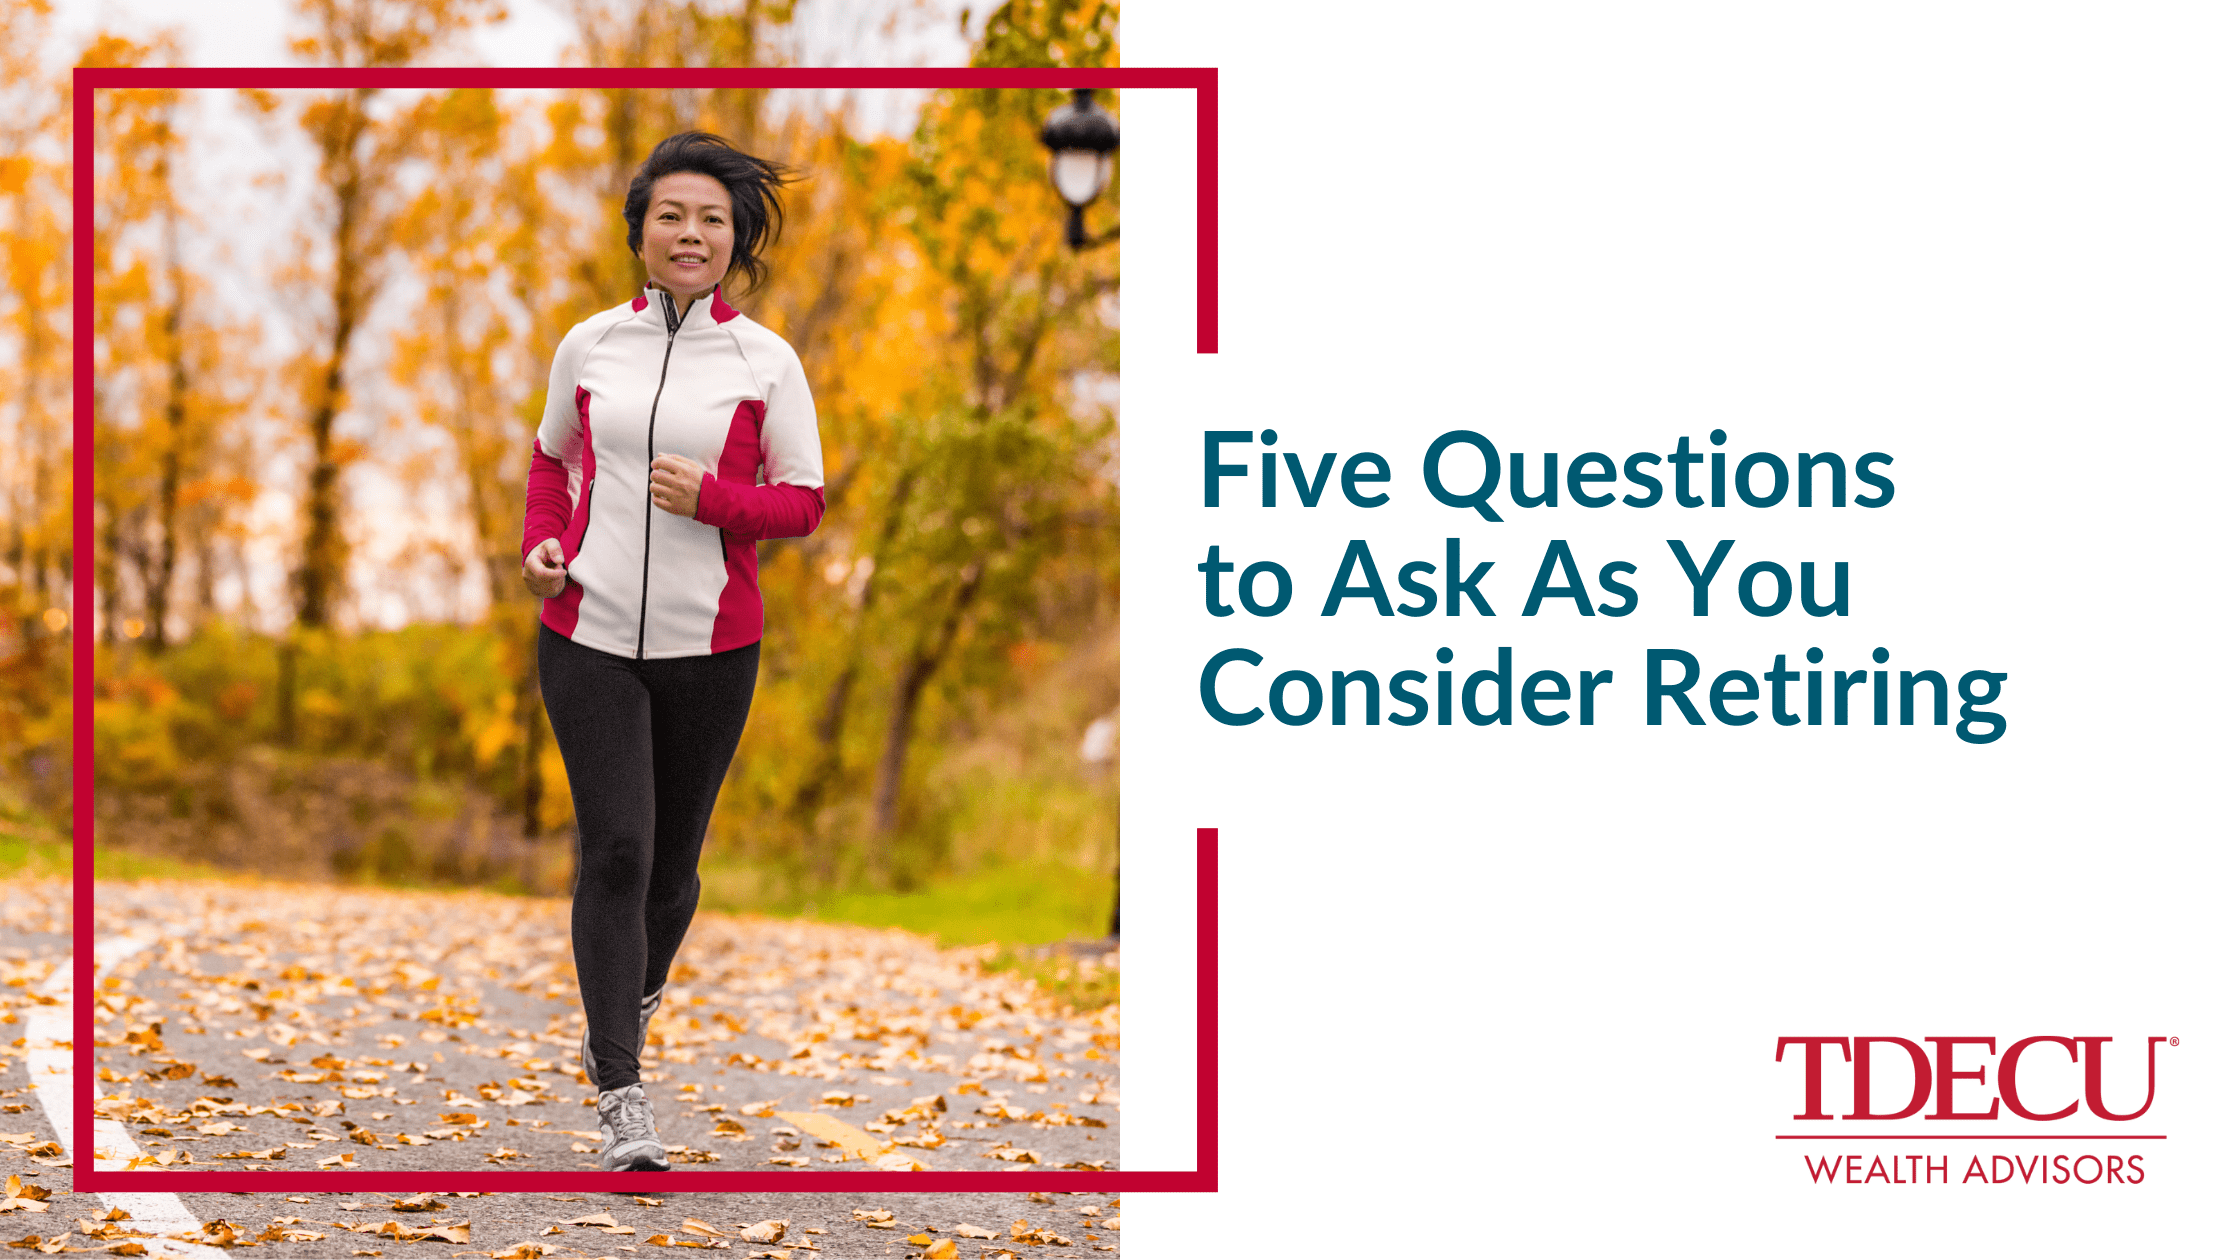 Five Questions to Ask As You Consider Retiring